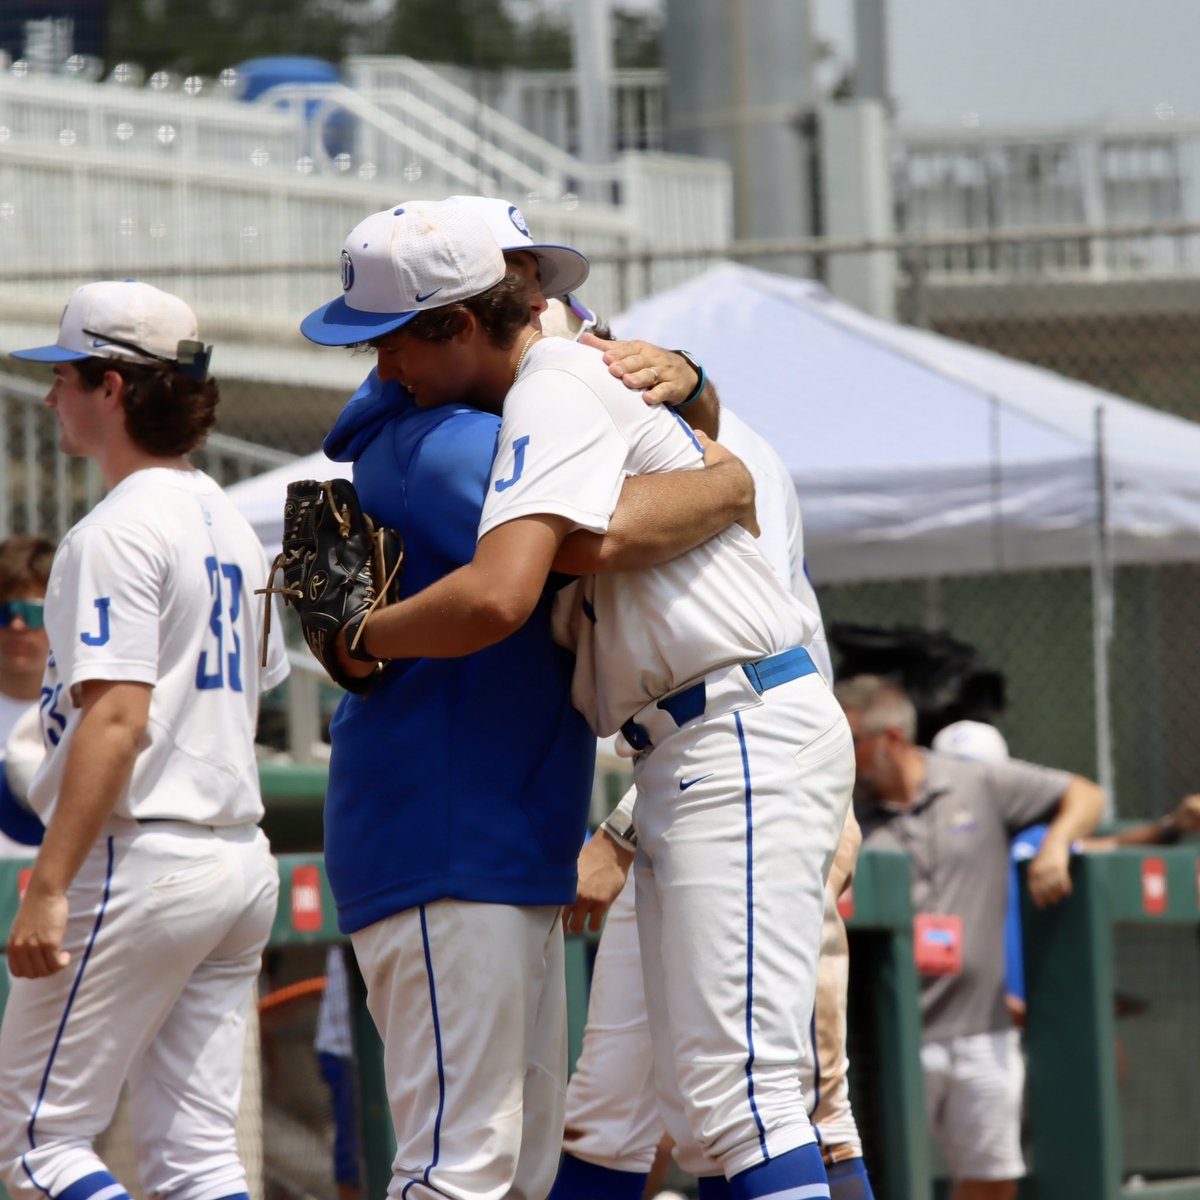 State Semifinal after 5, and FINAL: Wesley Chapel 1 Jesuit 11 JESUIT IS HEADED BACK TO THE 5A STATE FINAL! The Tigers will face the winner of American Heritage vs Lincoln on Saturday at 2:00pm back in Hammond Stadium in Ft. Myers! #AMDG #GoTigers